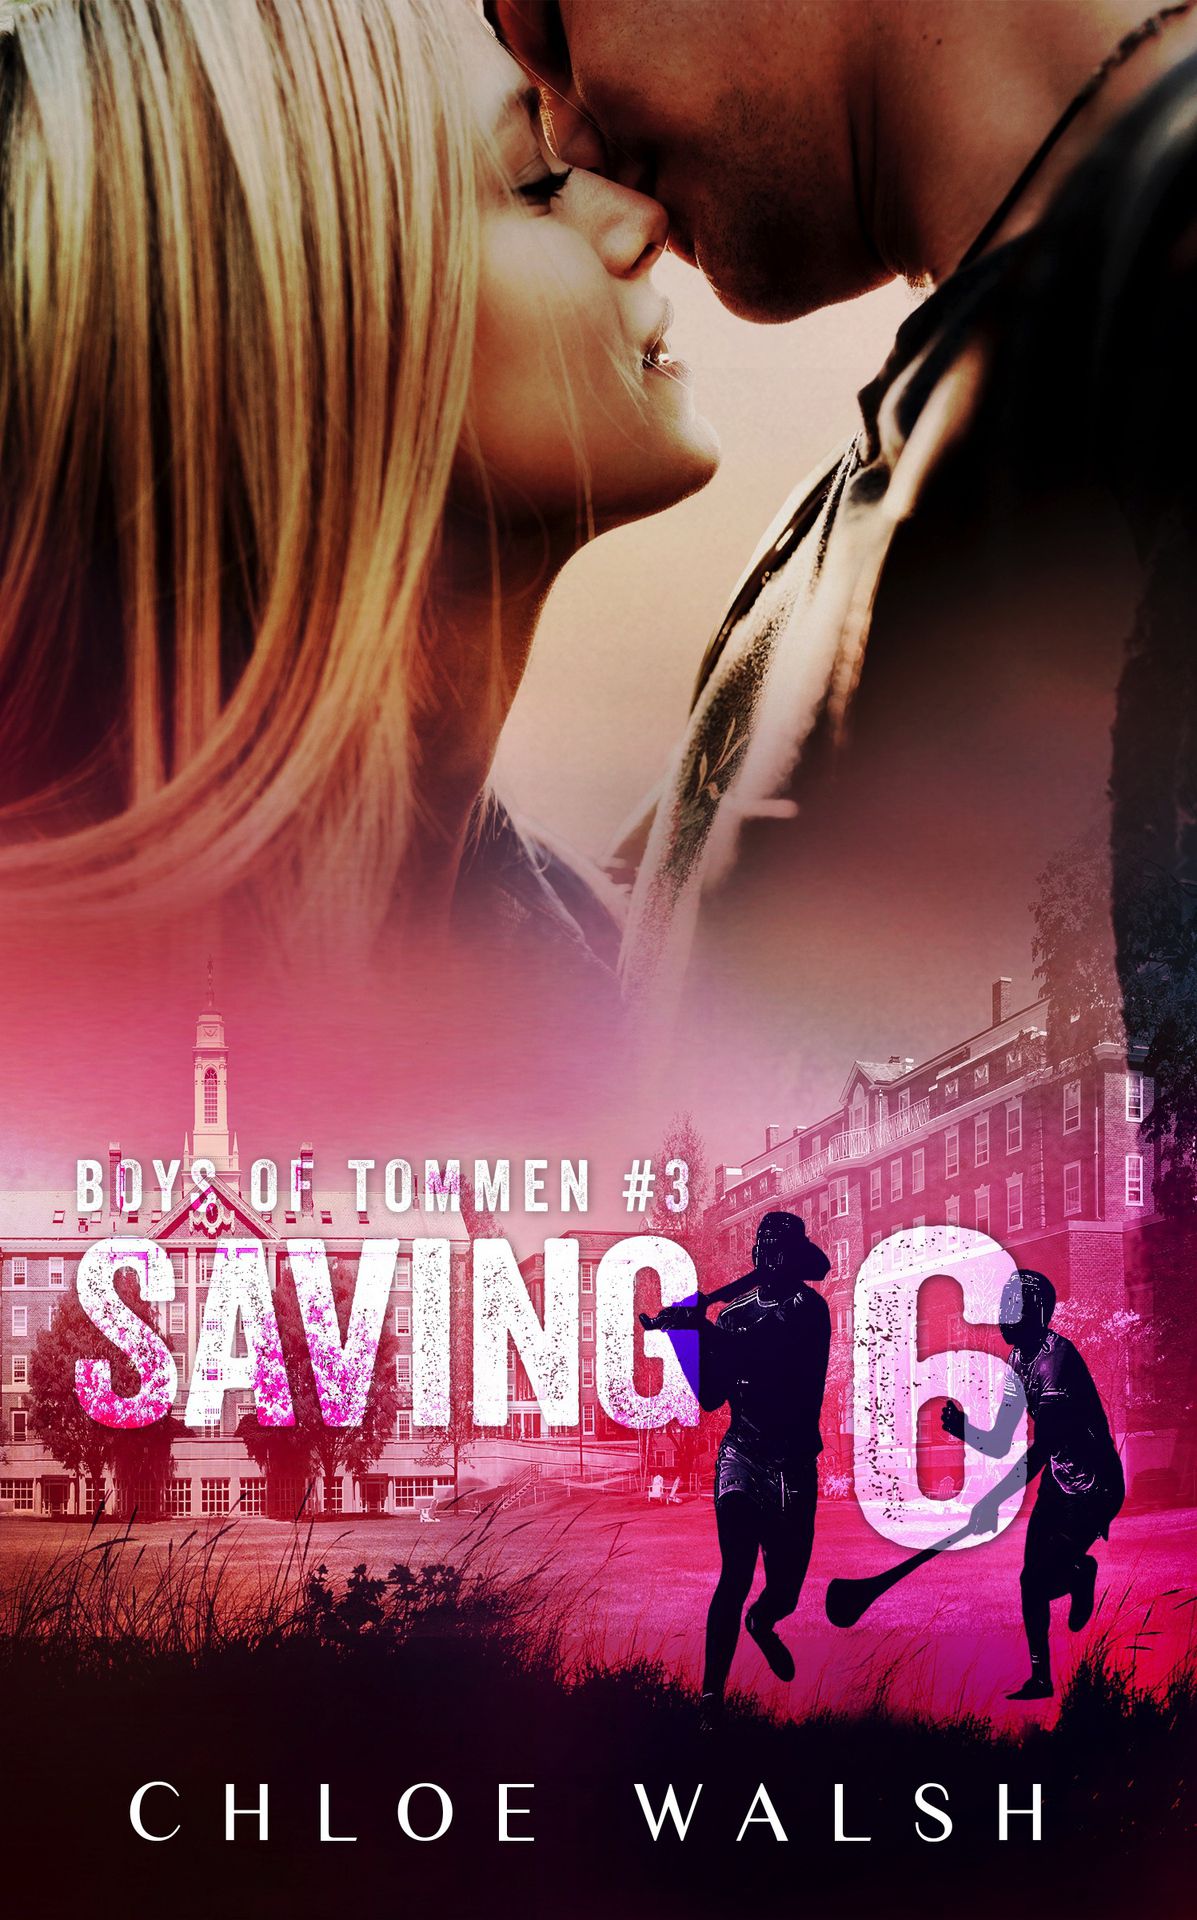 Saving 6 by Chloe Walsh book cover, featuring a bold title on a purple background with a yellow flower and scattered petals, emphasizing a dramatic and emotional theme."